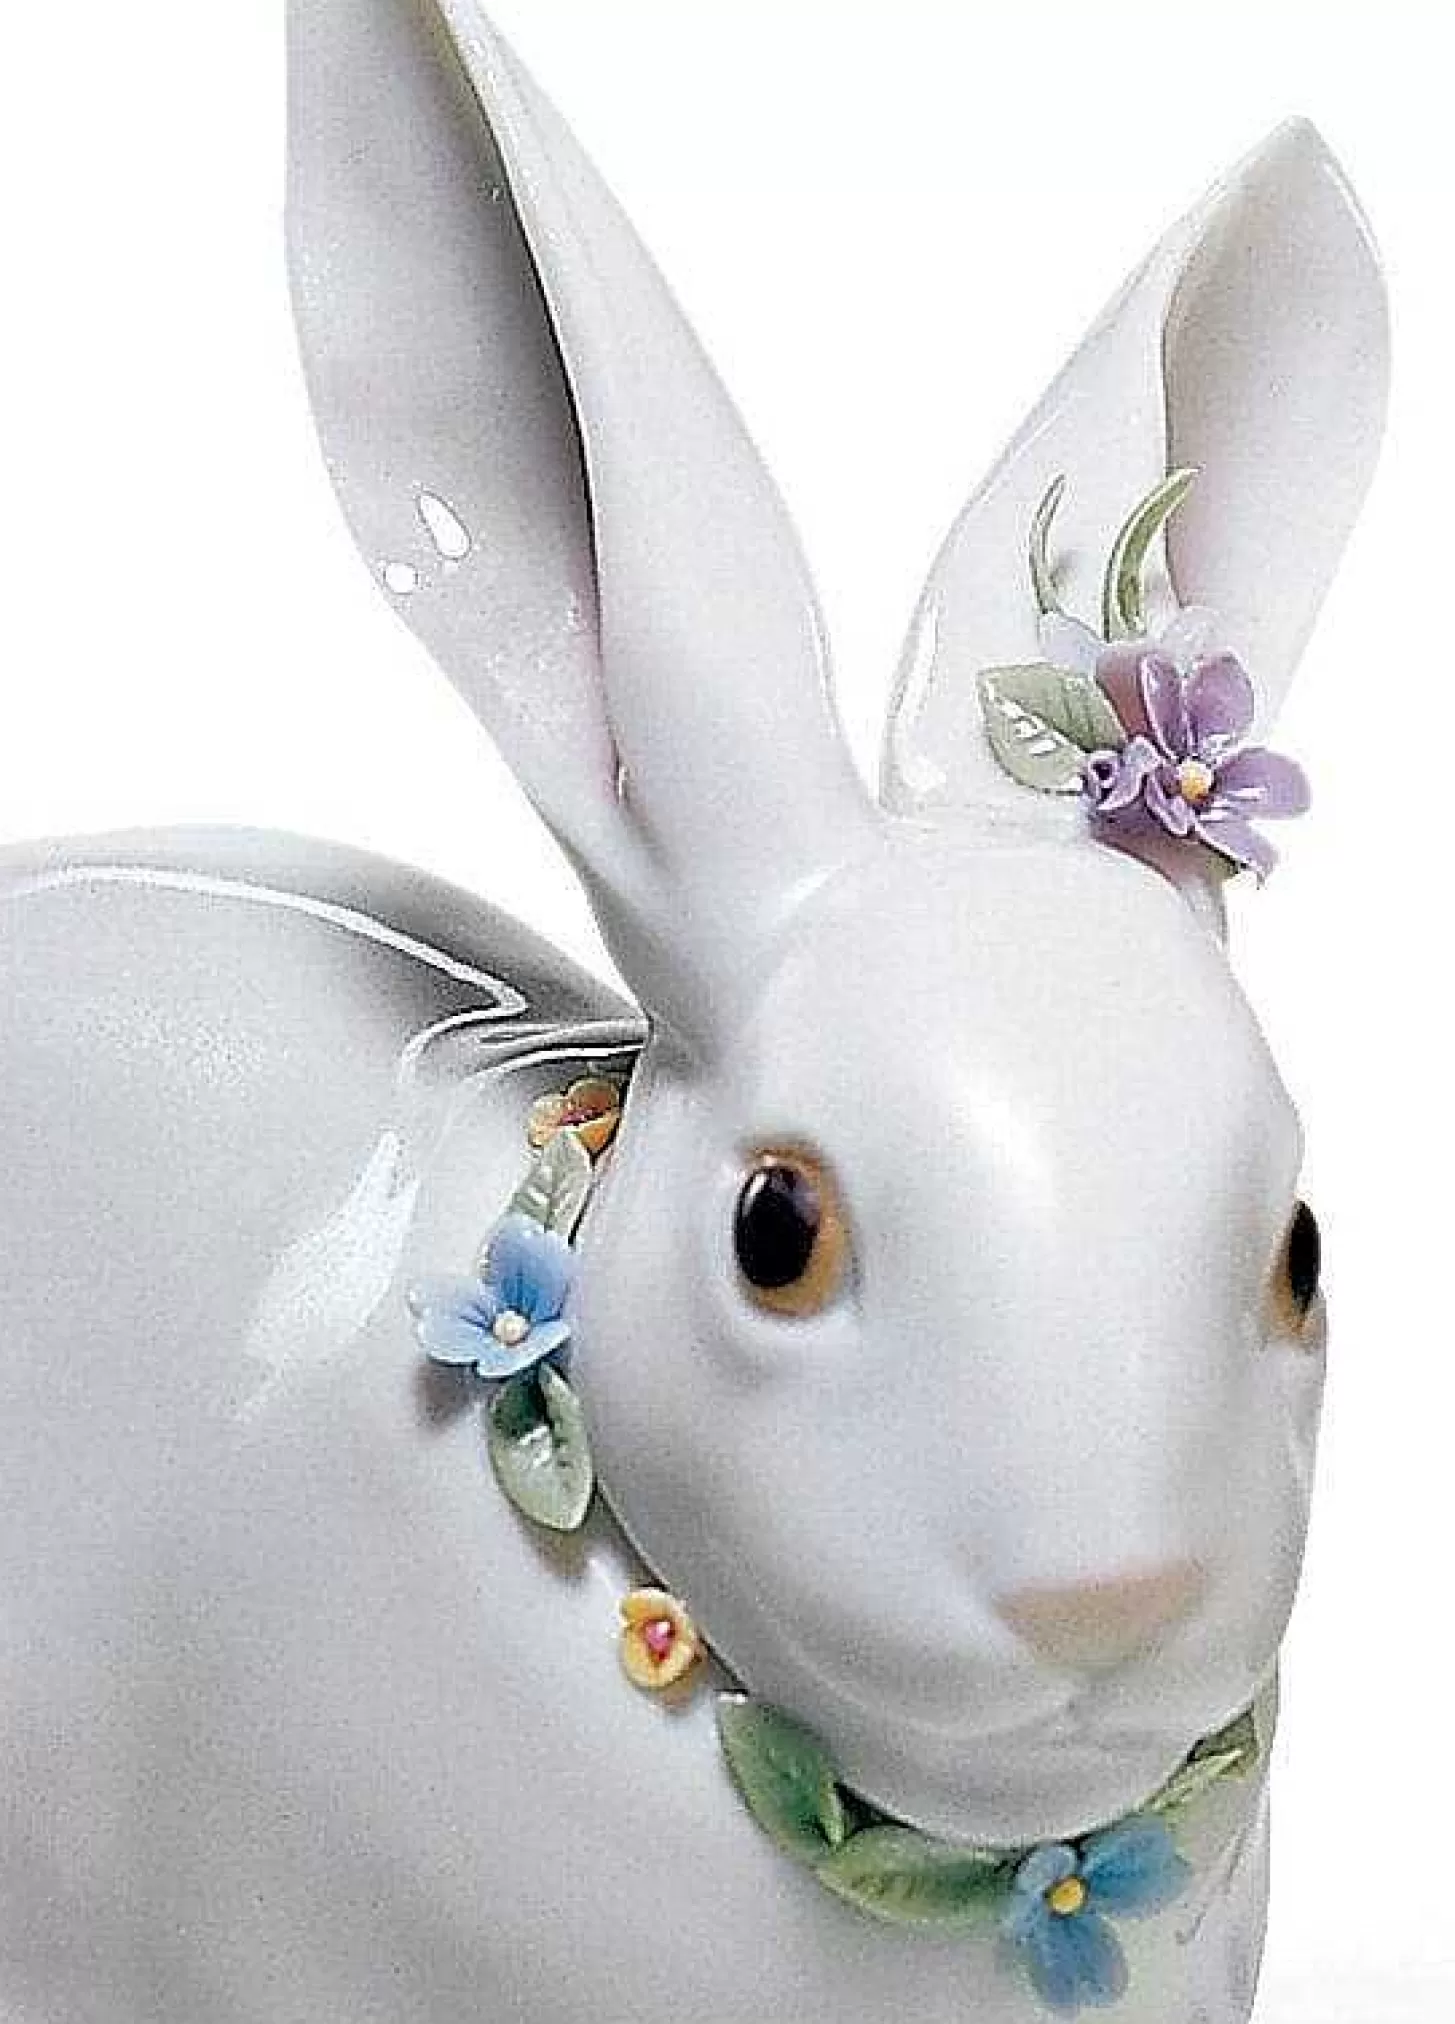 Lladró Attentive Bunny With Flowers Figurine^ Animals